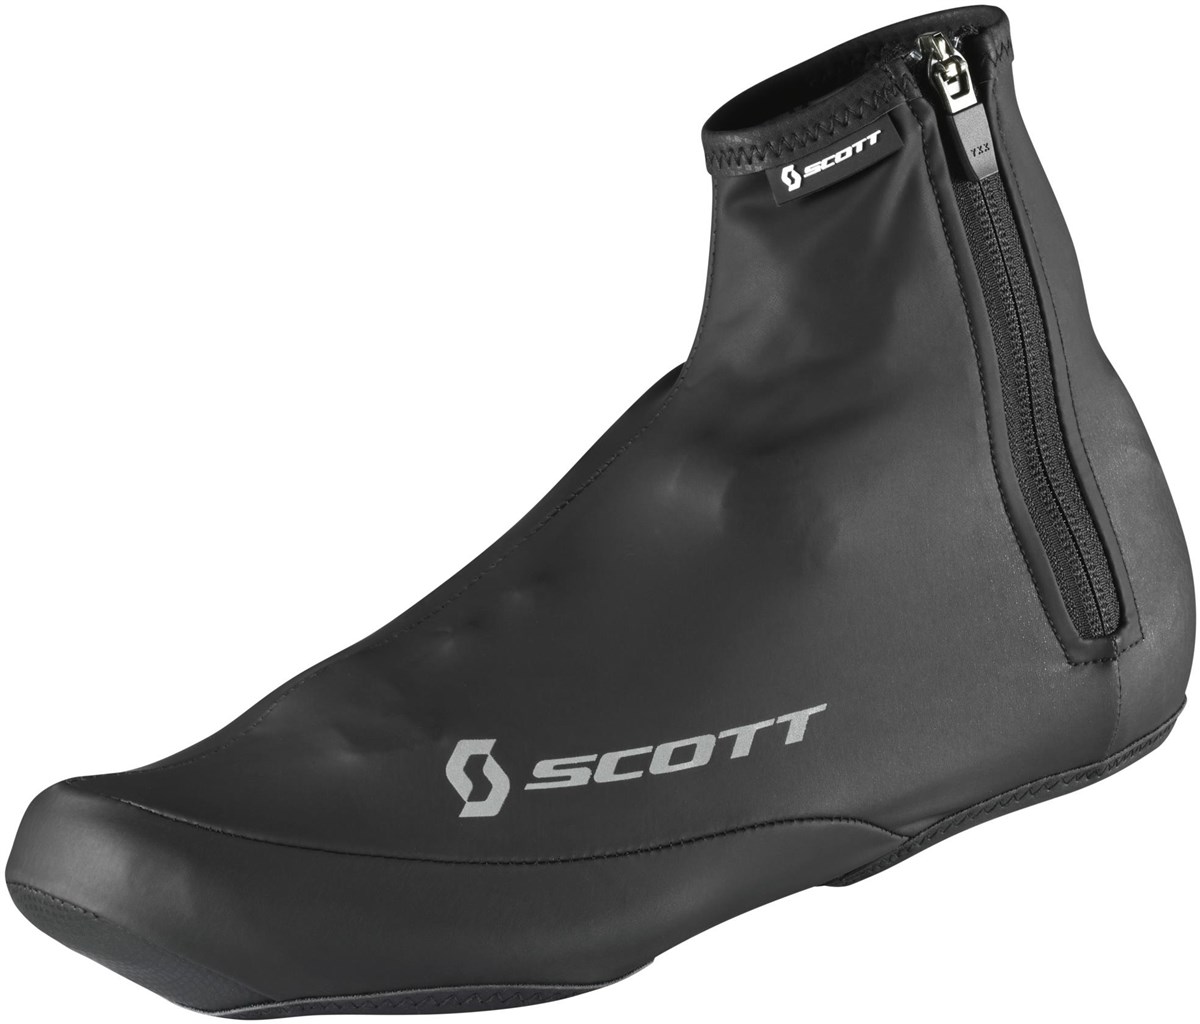 Scott AS 20 Shoecover product image